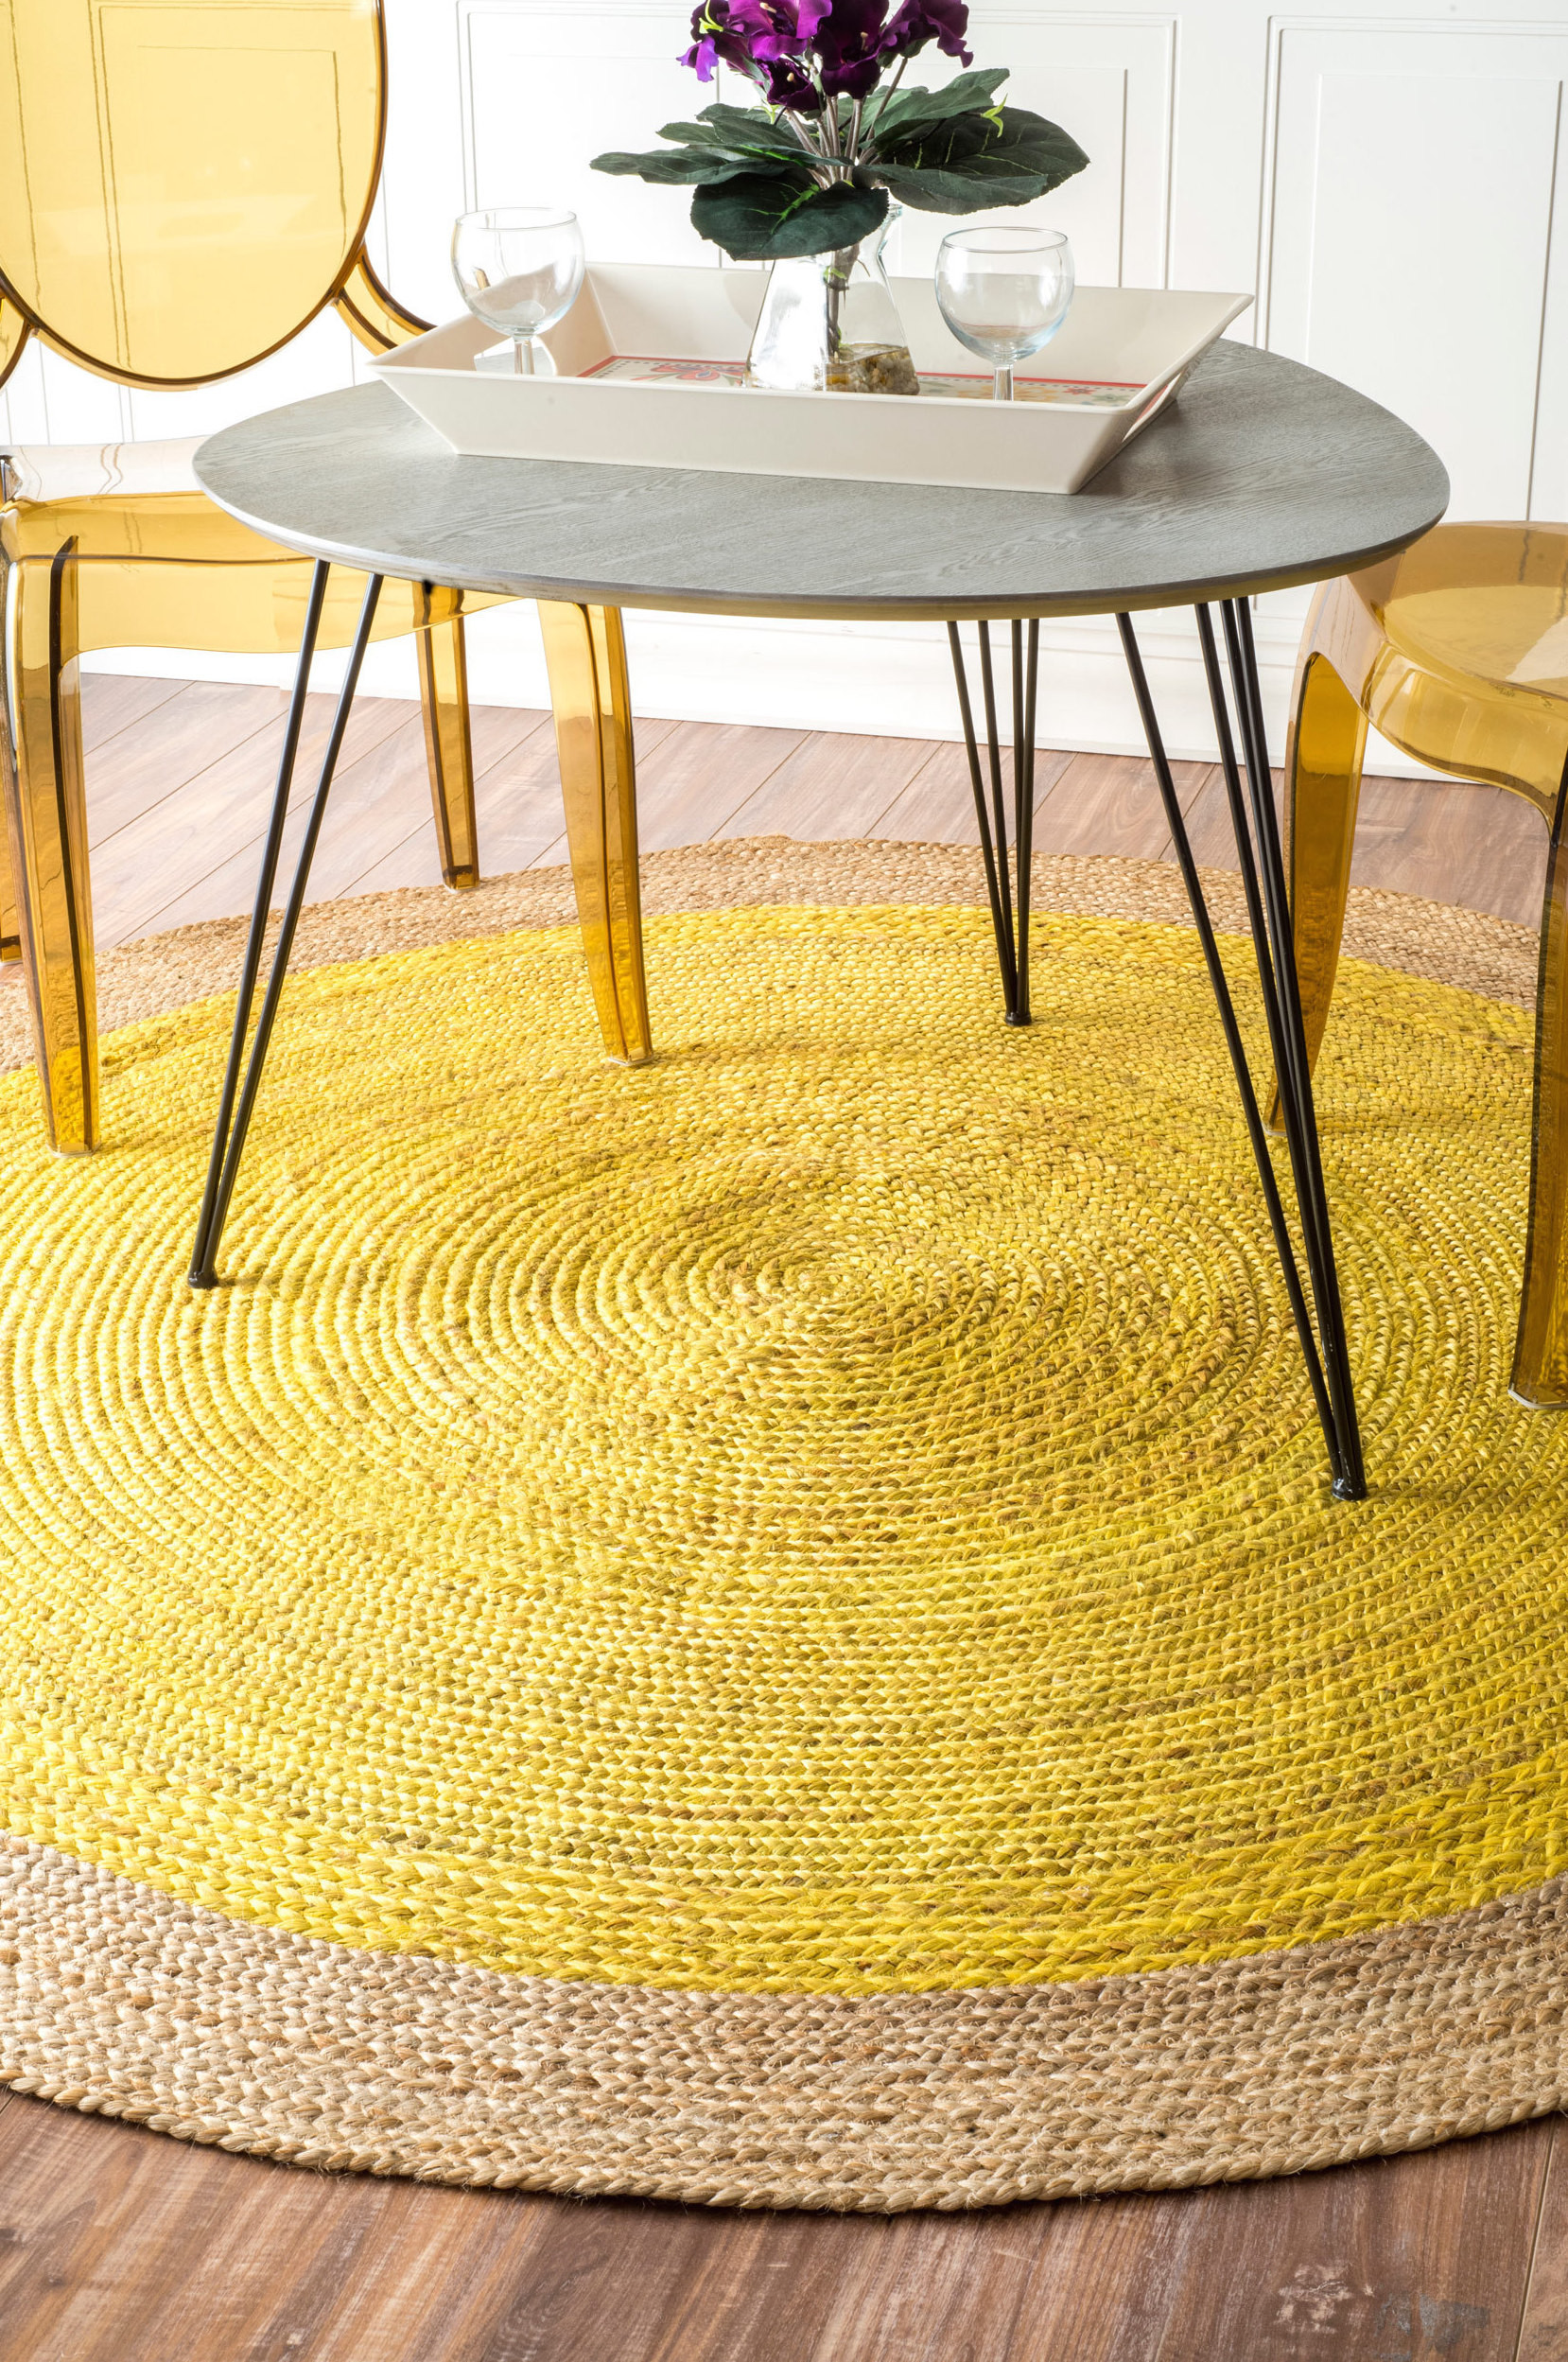 Yellow Rugs For Living Room
 Round yellow nuLOOM rug from Overstock Round yellow nuLOOM